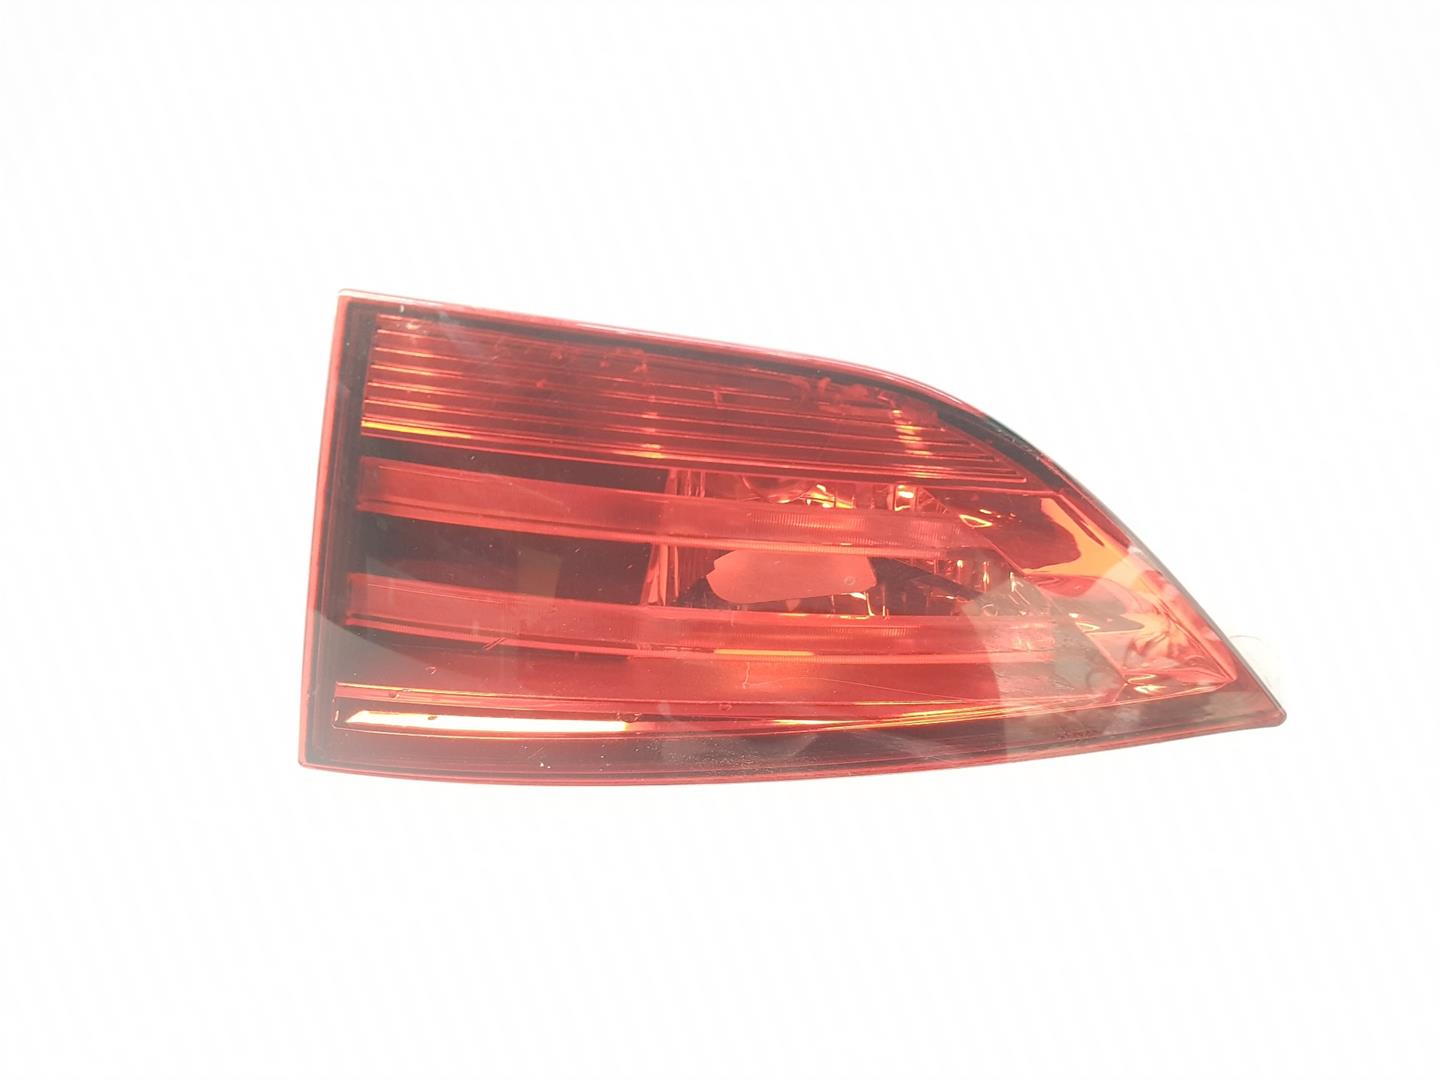 BMW X1 E84 (2009-2015) Rear Right Taillight Lamp 63212990114, 63212990114, 2222DL 24132100